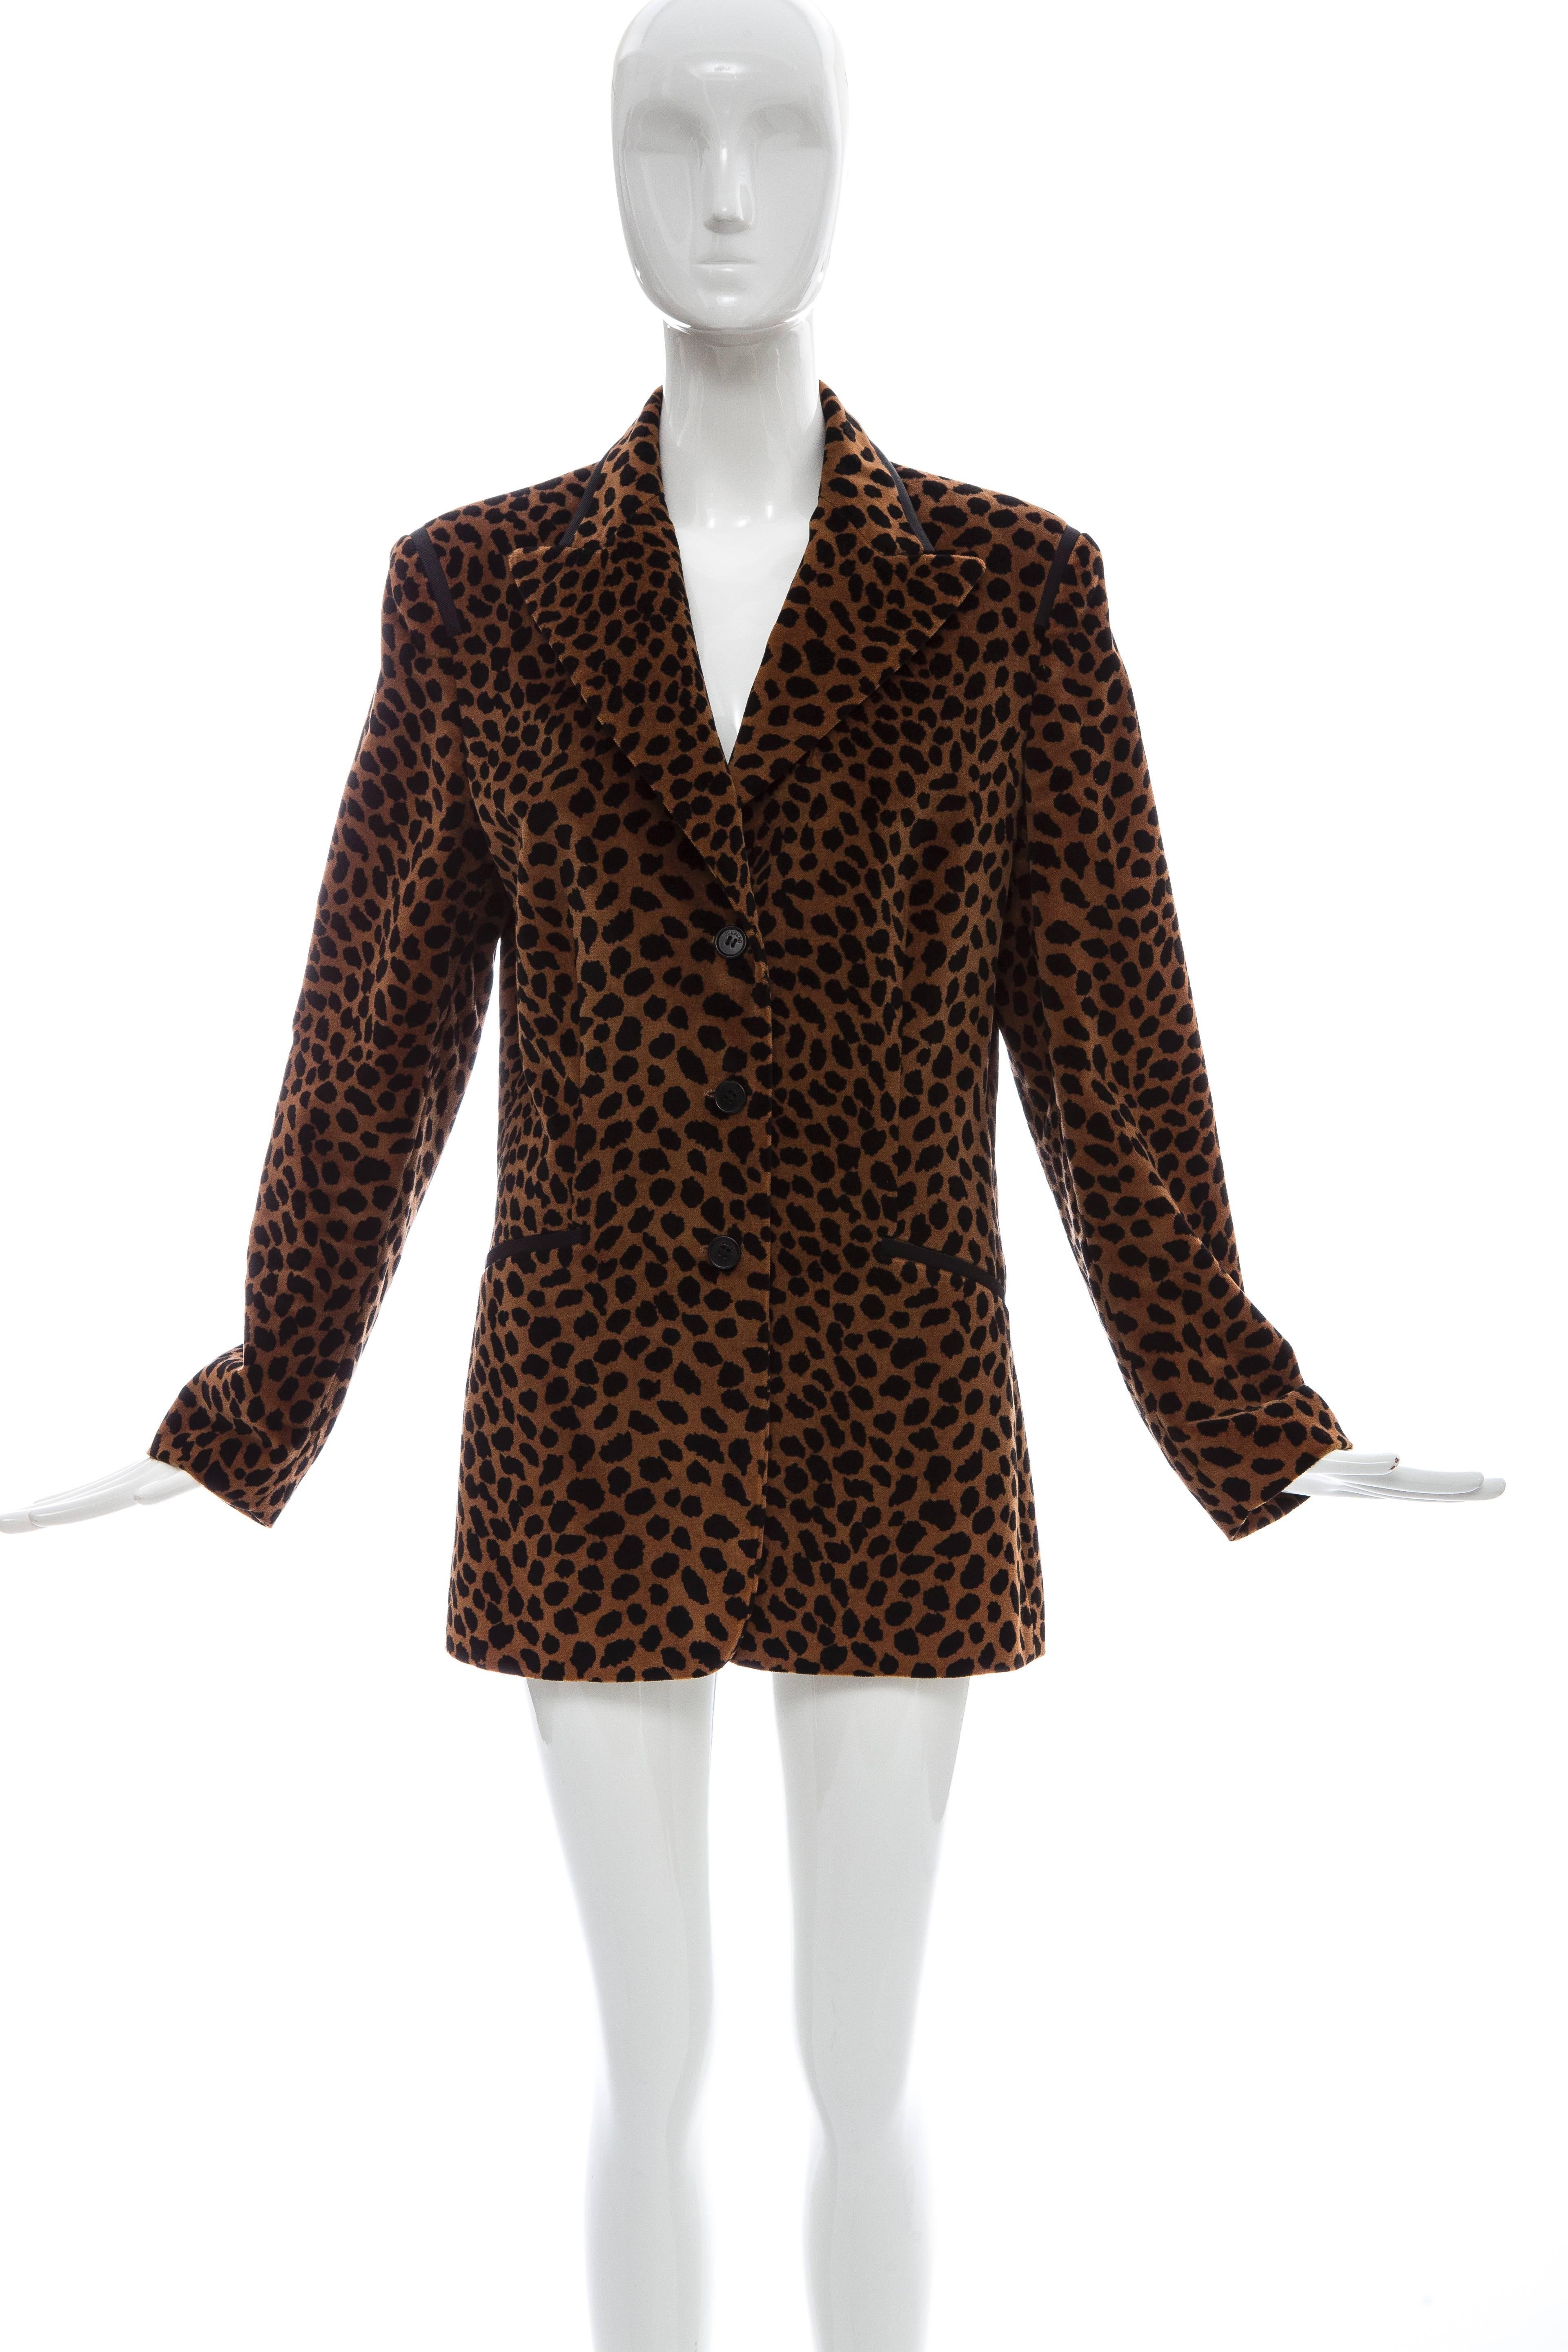 Iceberg, Circa: 1990's cotton velvet animal print blazer with black grosgrain trim, button front, two faux pockets and fully lined.

No Size Label

Bust 38, Waist 34, Hips 40, Length 29.5